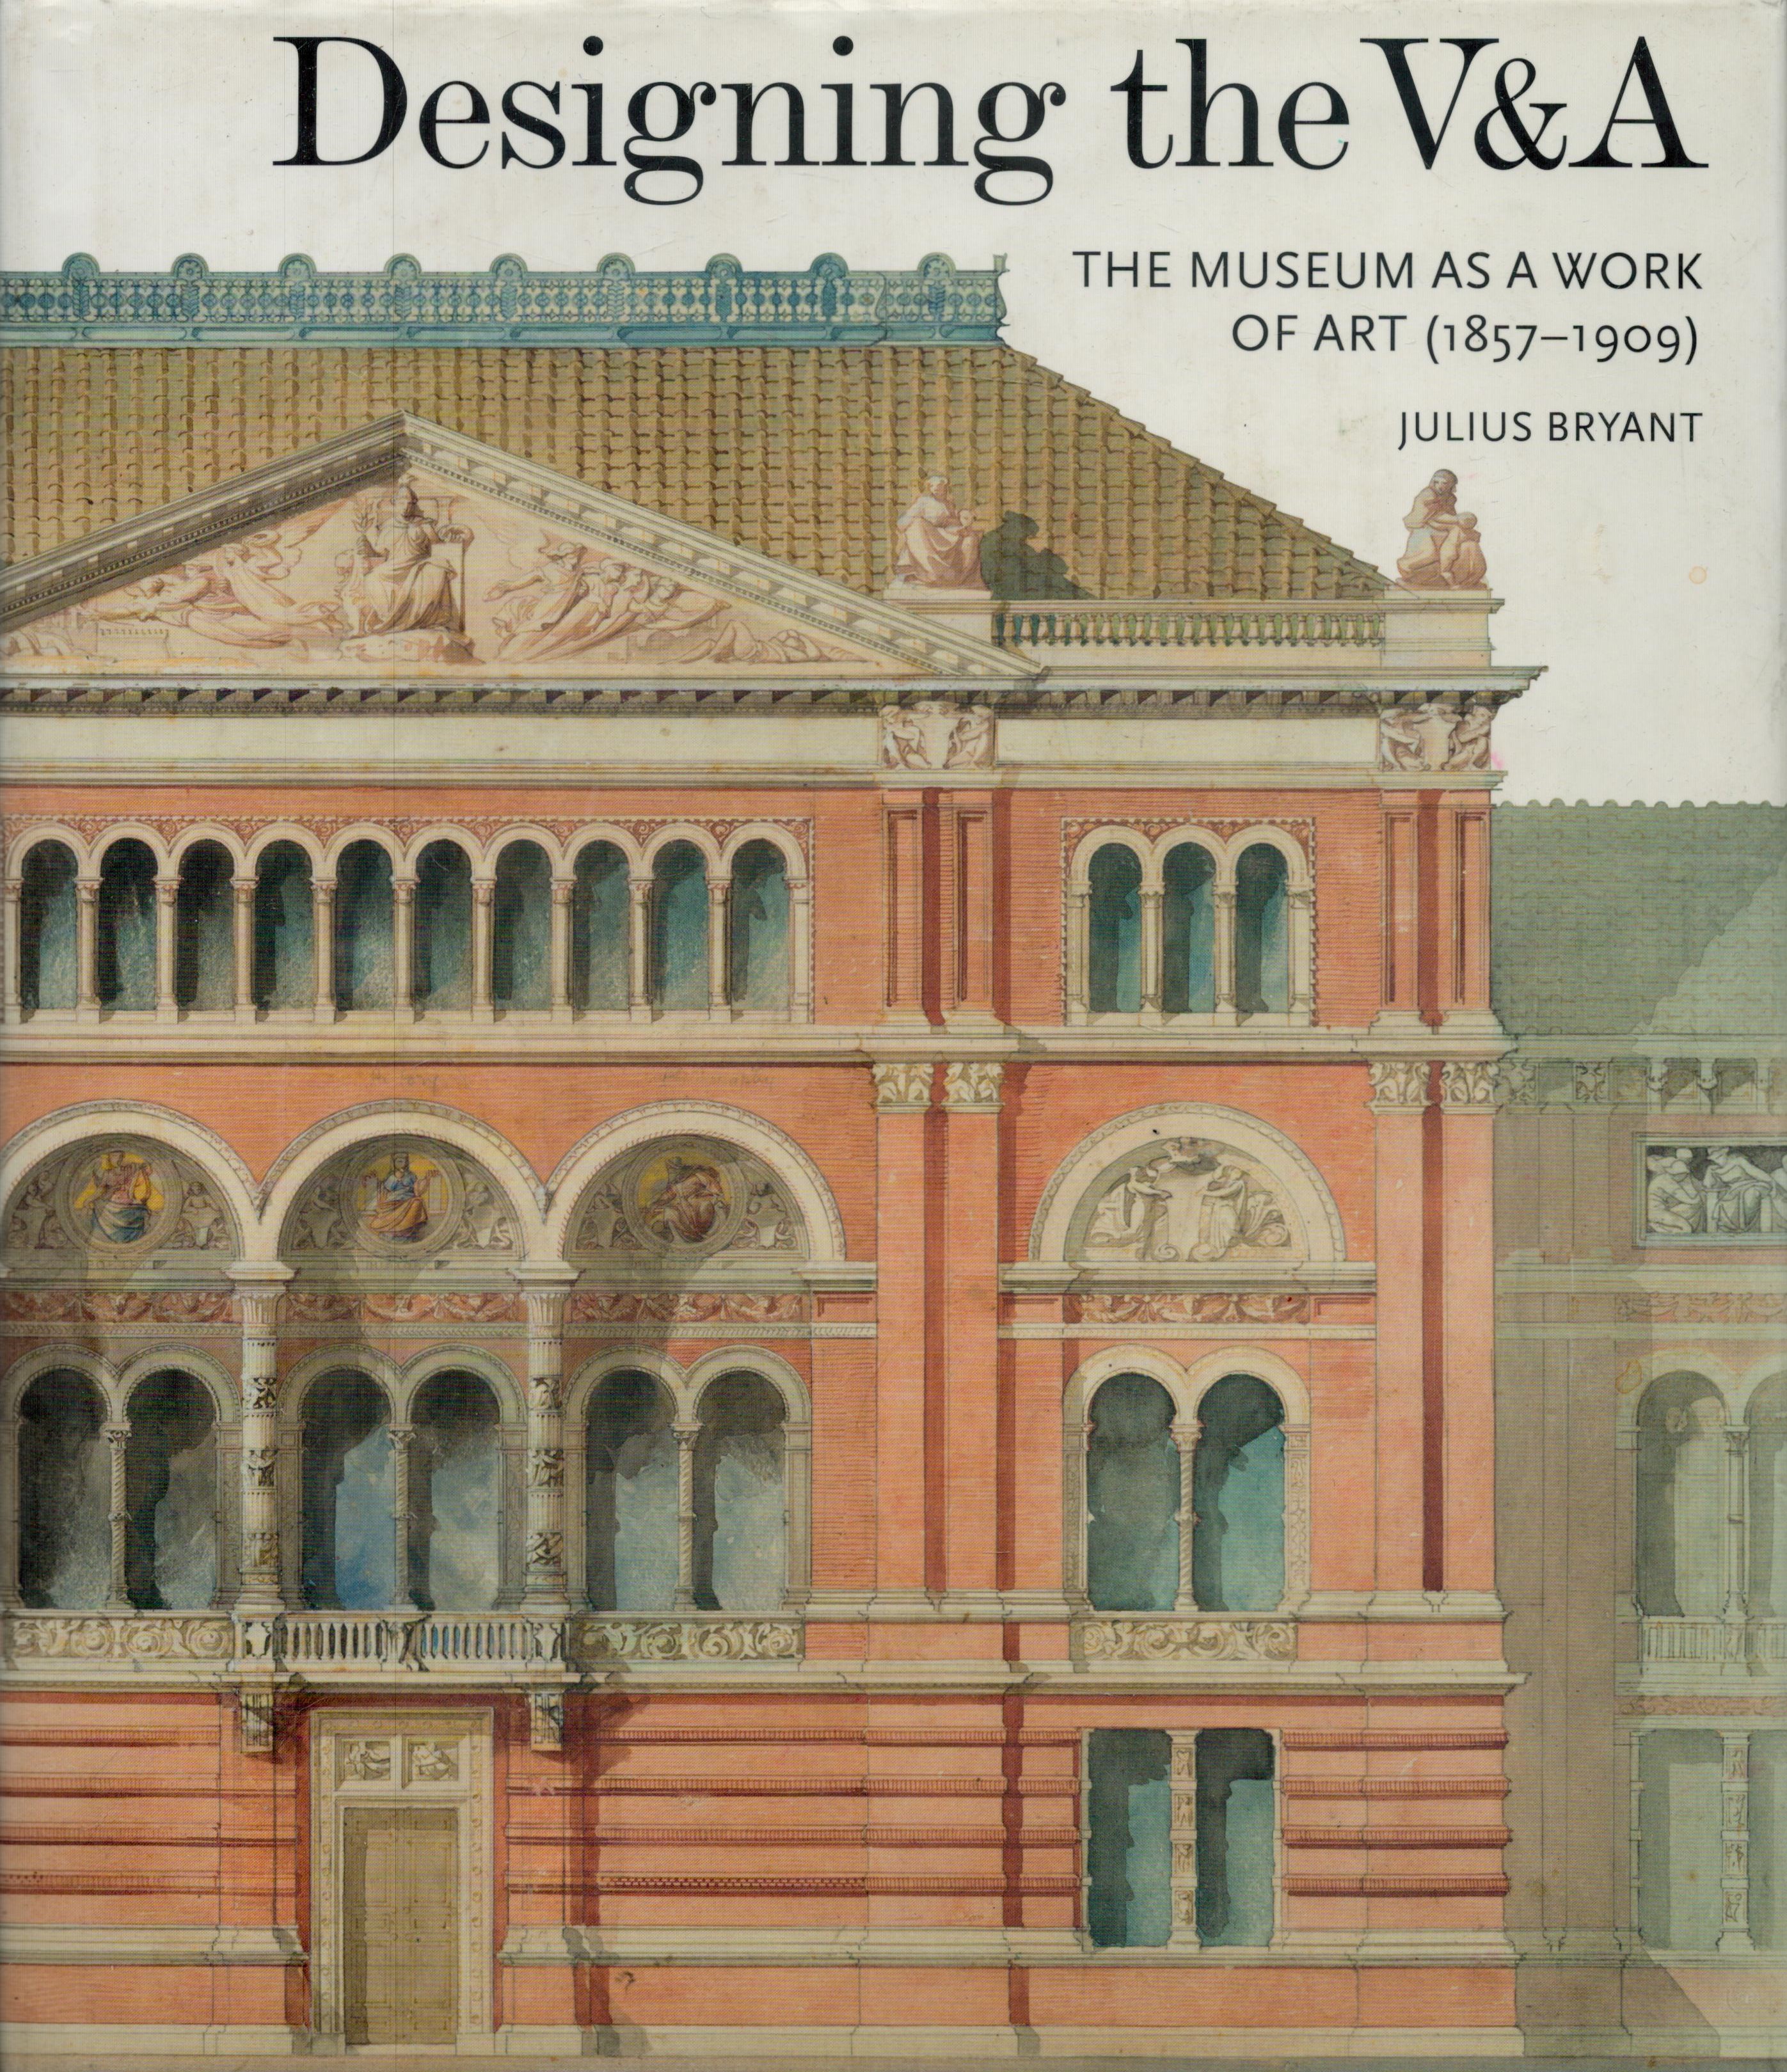 Designing the V & A - The Museum as a Work of Art (1857-1909) by Julius Bryant 2017 hardback book